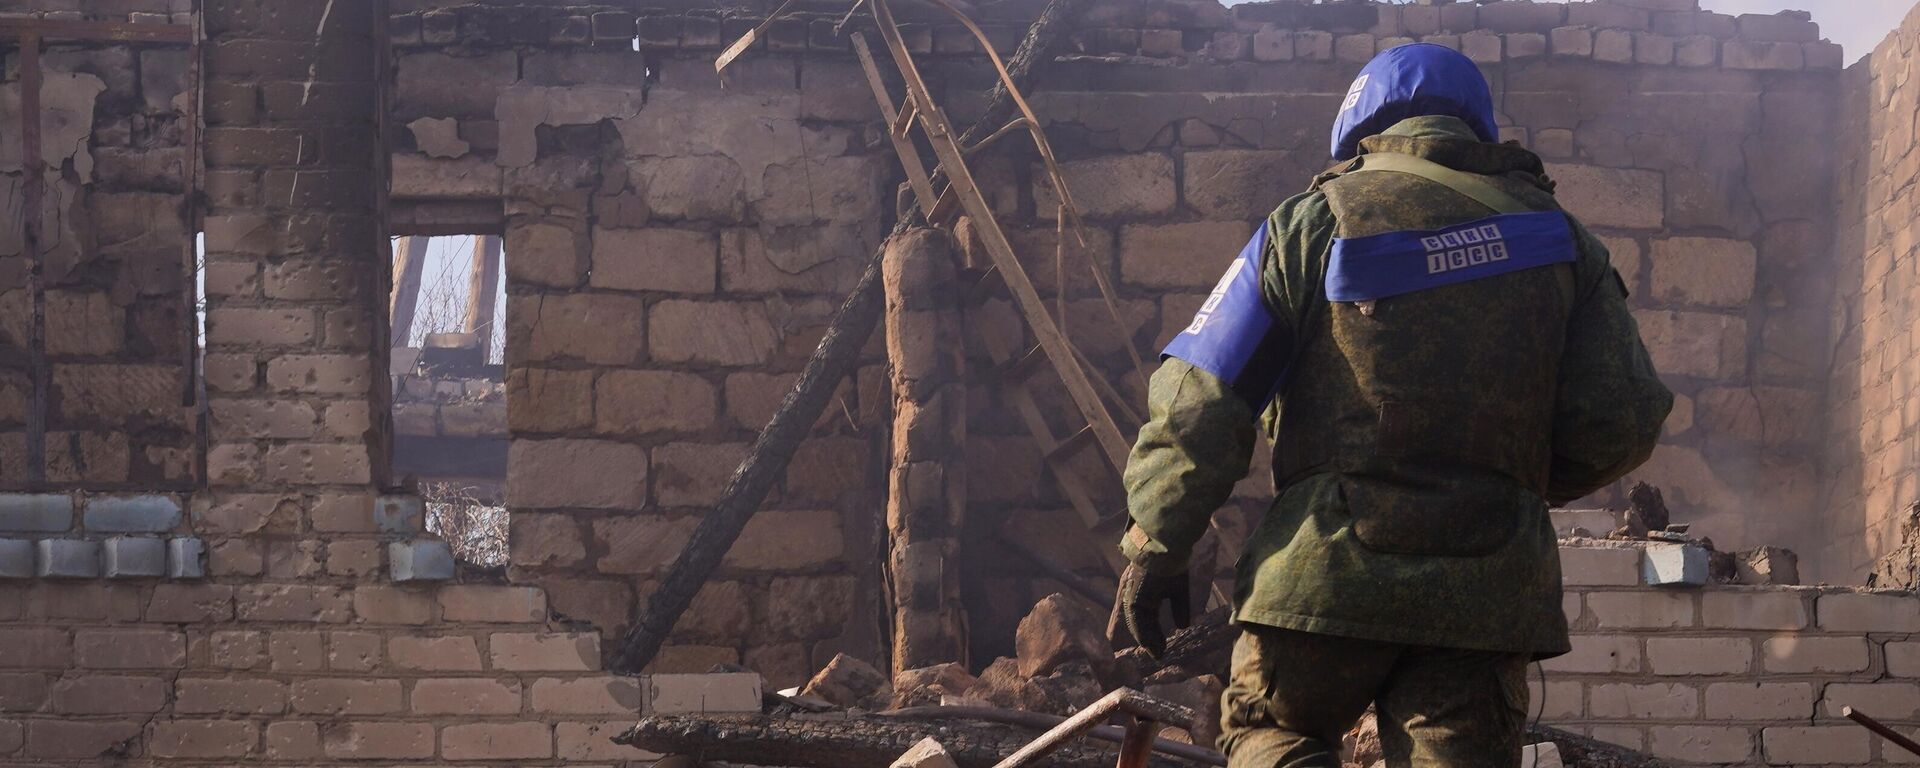 An employee of the Joint Centre for Control and Coordination on ceasefire and stabilization of the demarcation line (JCCC) is seen near a residential building destroyed as a result of shelling by the Ukrainian Armed Forces, in the village of Pionerskoye, Luhansk region, self-proclaimed Luhansk People's Republic, Eastern Ukraine - Sputnik International, 1920, 21.02.2022